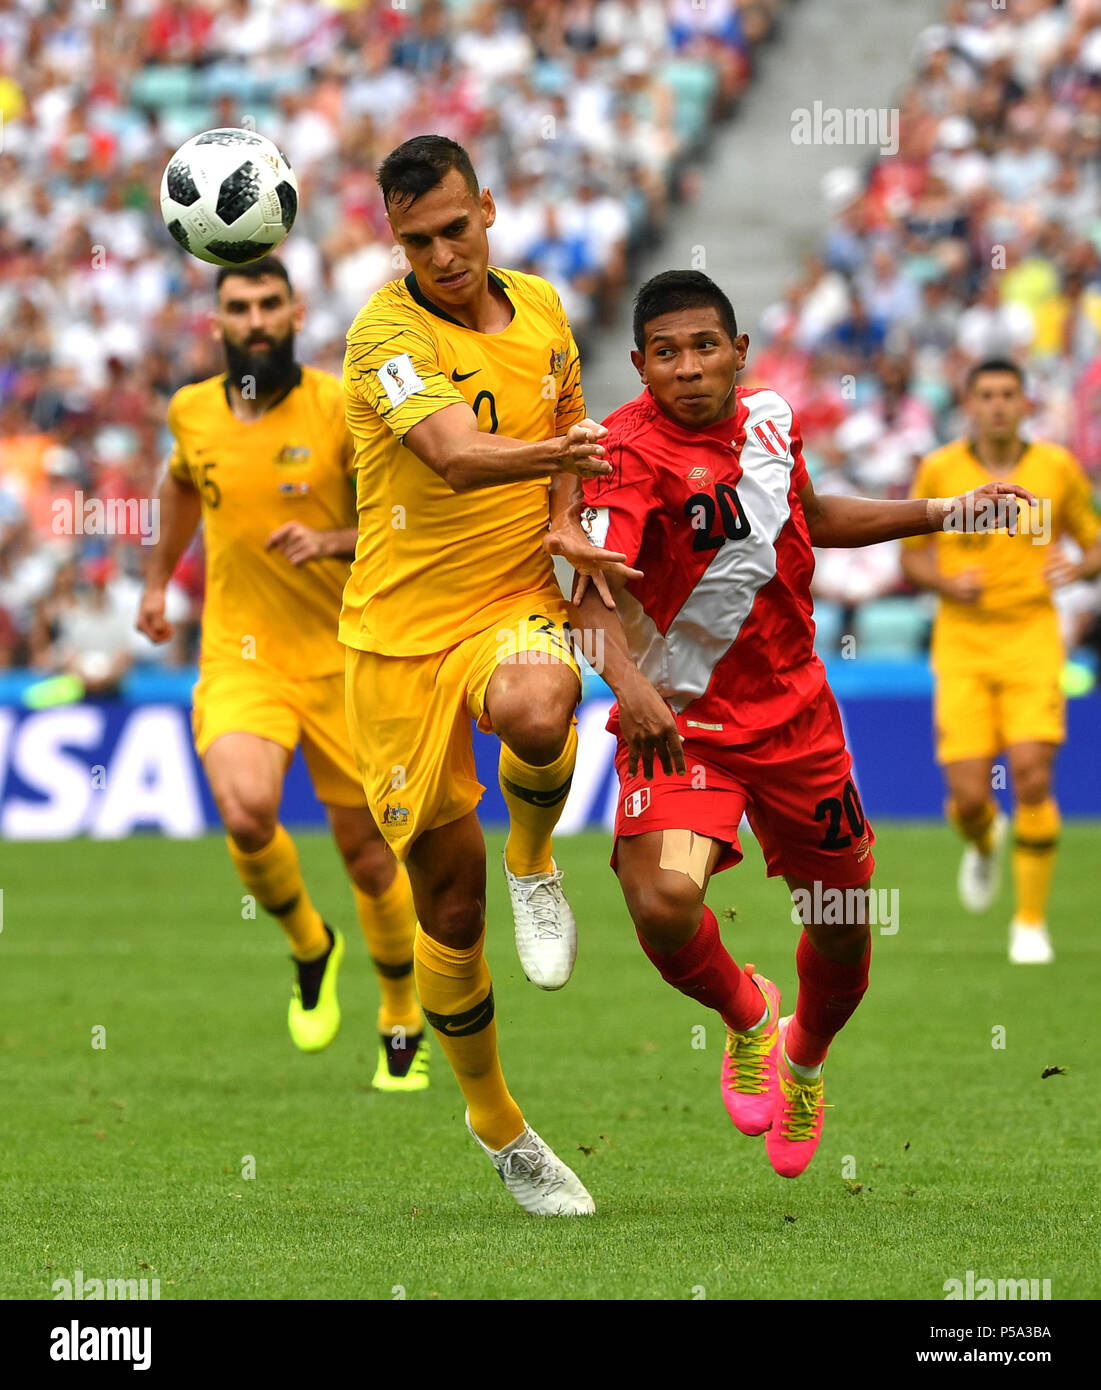 Sochi, Russia. 26th June, 2018. Trent Sainsbury (L front) of Australia vies with Edison Flores (R front) of Peru during the 2018 FIFA World Cup Group C match between Australia and Peru in Sochi, Russia, June 26, 2018. Credit: Chen Cheng/Xinhua/Alamy Live News Stock Photo